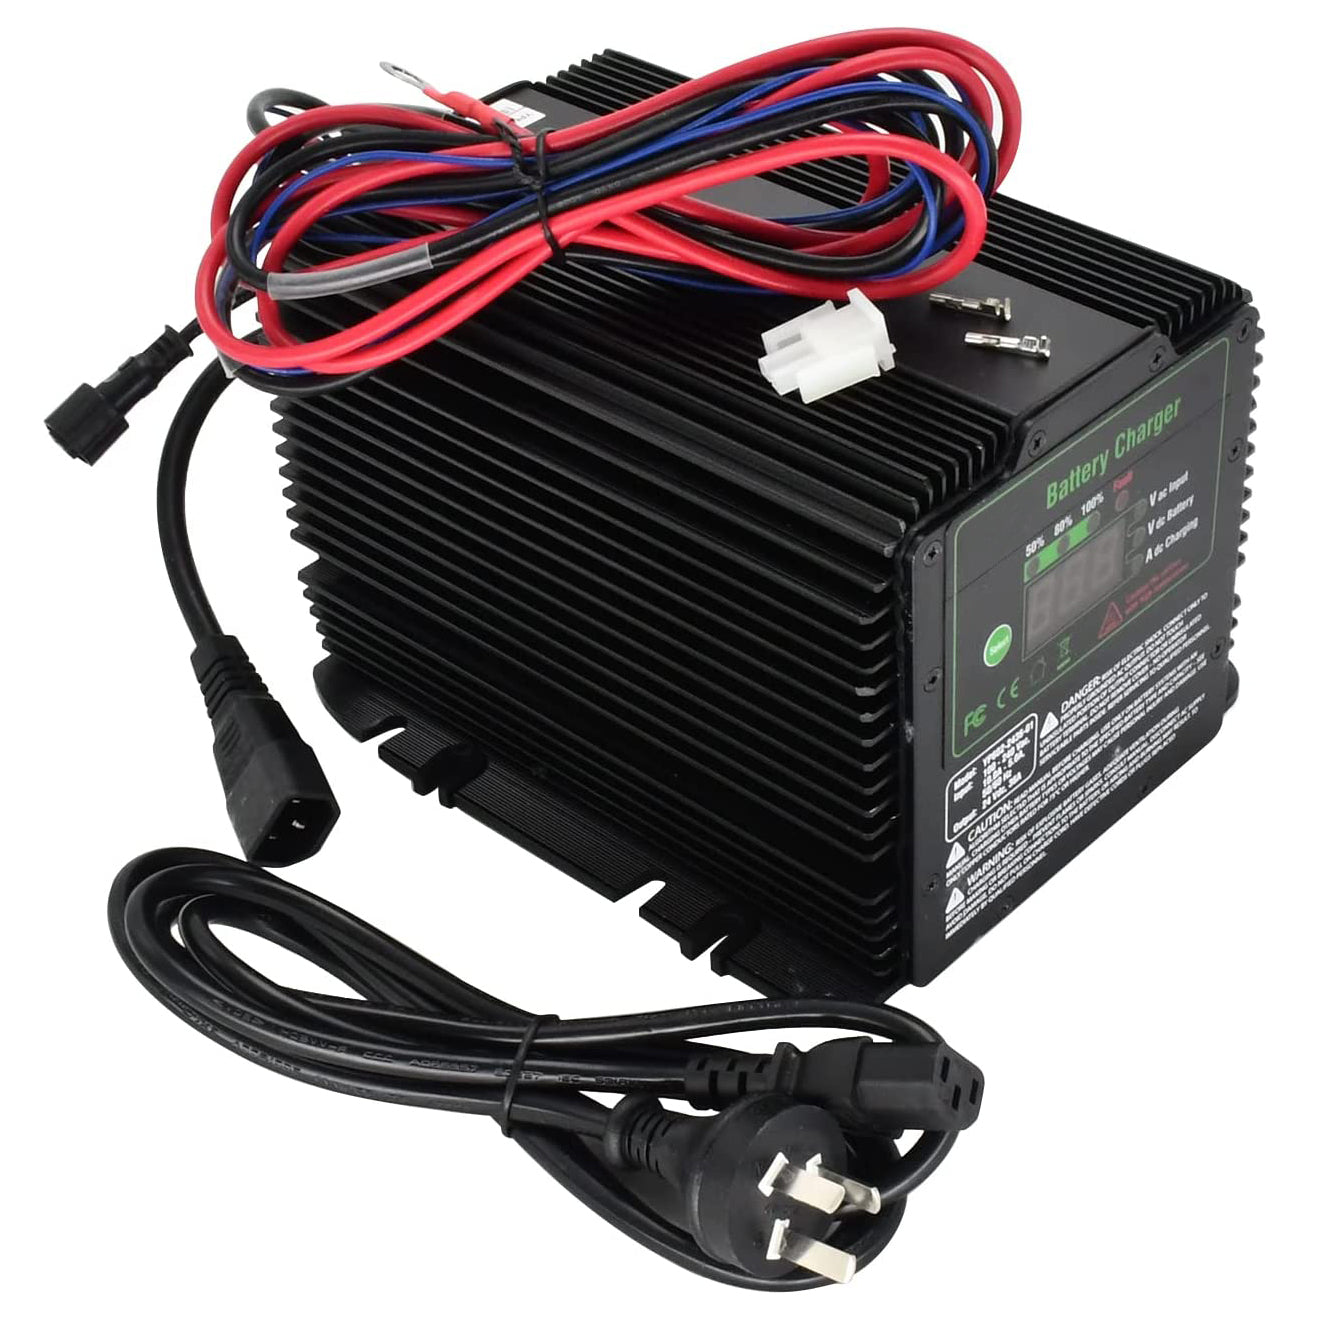 New 128537 Battery Charger Compatible with Skyjack Lift 4620 4626 4832 3015 3219 3220 3226 24V 25A